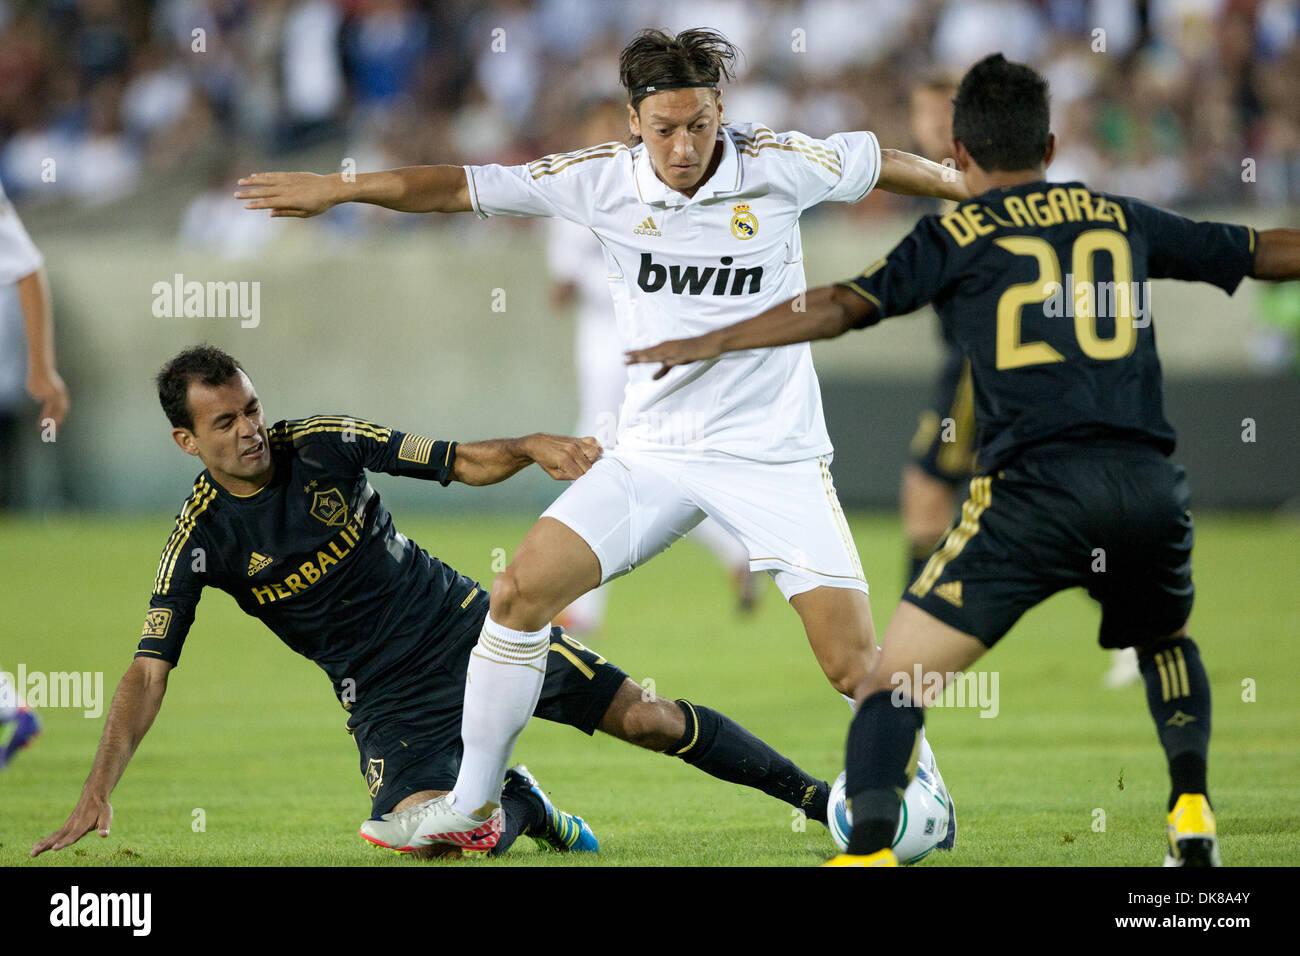 July 16, 2011 - Los Angeles, California, U.S - Real Madrid C.F. midfielder Mesut Ozil #23 tries to beat the Galaxy defense during the World Football Challenge game between La Liga powerhouse Real Madrid and the Los Angeles Galaxy at the Los Angeles Memorial Coliseum. Real Madrid went on to defeat the Galaxy with a final score of 4-1. (Credit Image: © Brandon Parry/Southcreek Global Stock Photo